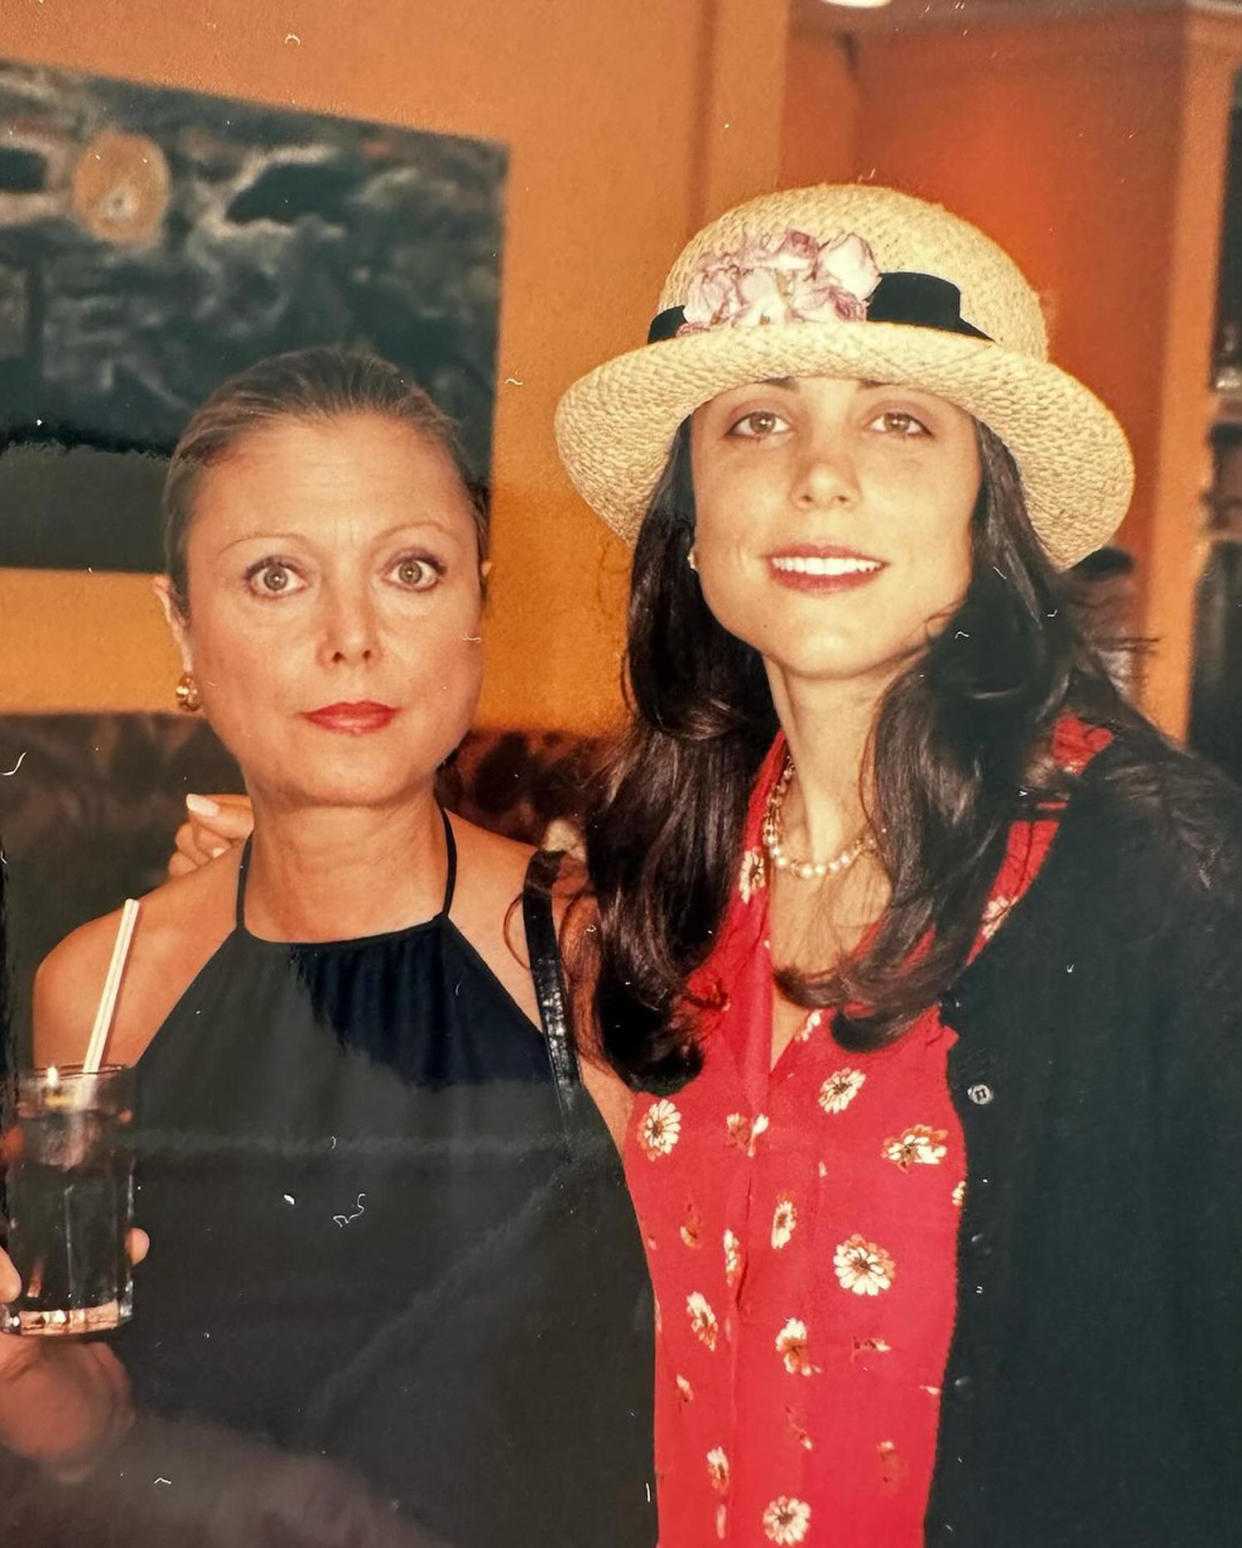 Bethenny Frankel shared several throwback photos of her mother in her touching Instagram tribute. (Bethenny Frankel / Instagram)